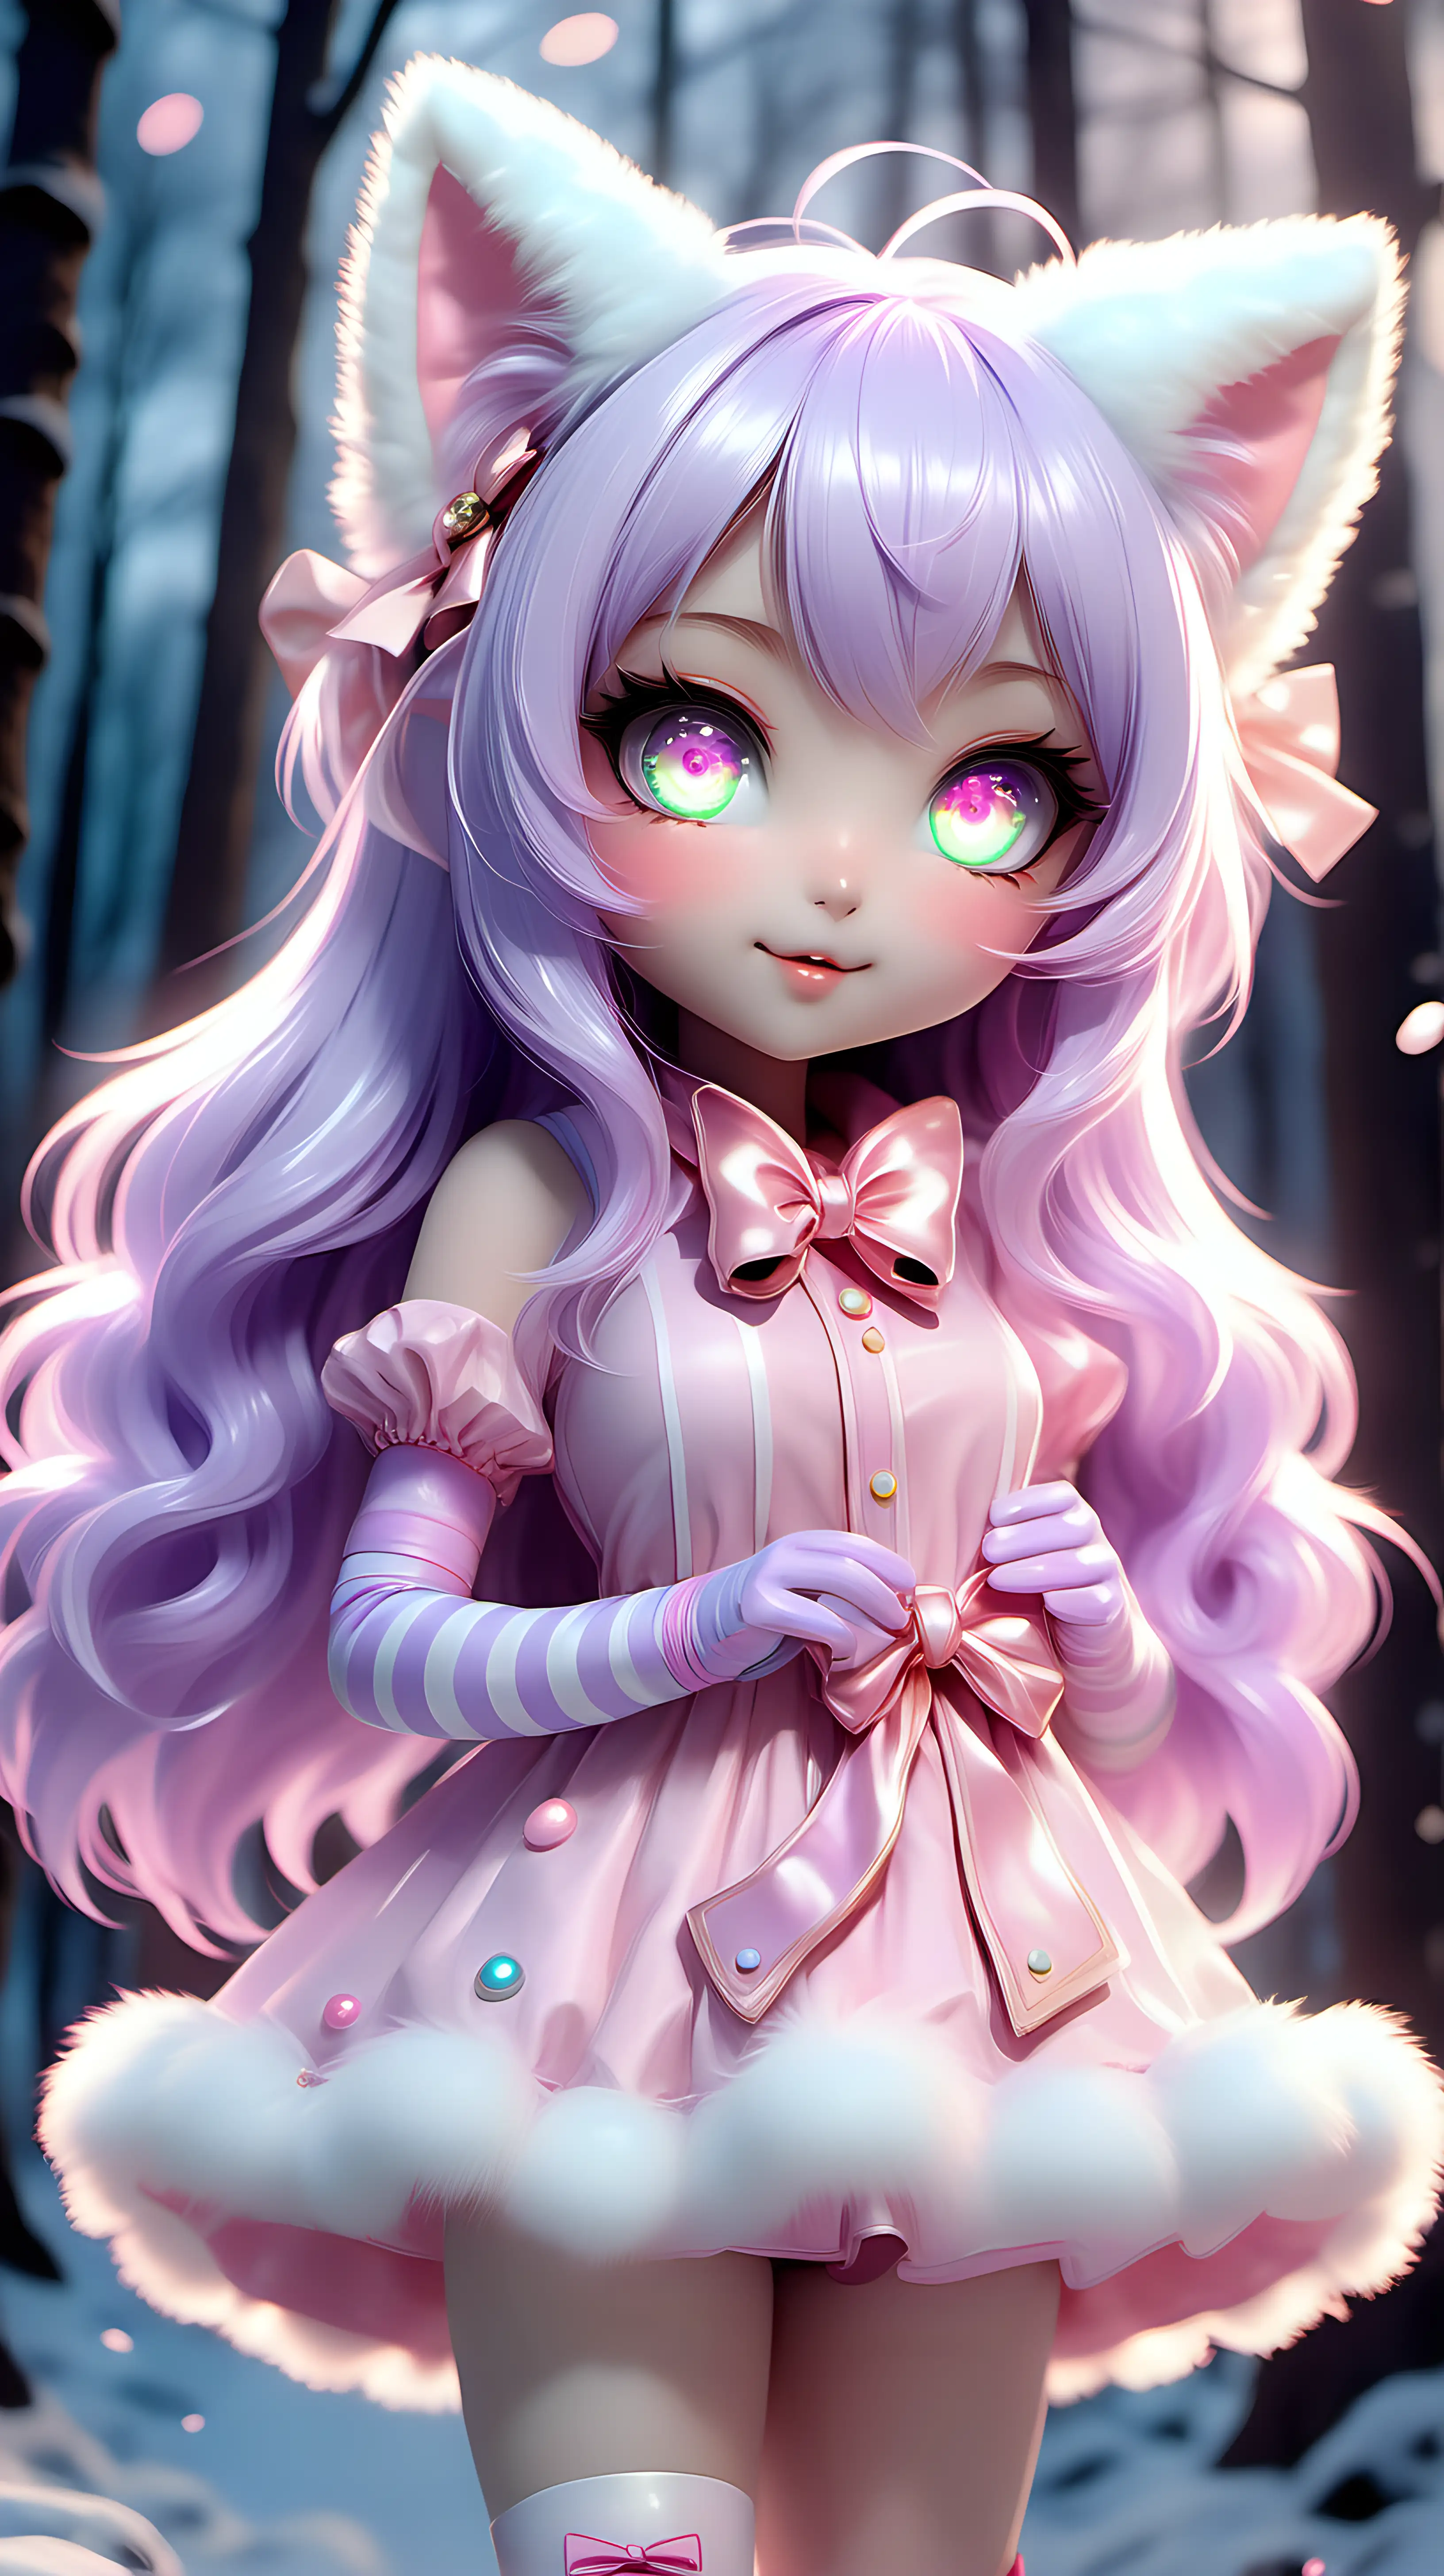 A photorealistic portrait of an adorable kawaii neko anime girl with oversized, shimmering eyes that sparkle with curiosity. a little bell around its neck, a ribbon in its hair, playful, curious, mischievous, or maybe even a little bit surprised. Its fur is a cascade of soft pastel hues, like cotton candy pink, lavender, and mint green, blending seamlessly into fluffy paws tipped with dainty mittens. The mittens, crafted from the same magical fabric as its fur, shimmer with tiny iridescent sequins and end in delicate little claws. Peeking from beneath the mittens are a pair of chunky boots, crafted from the same pearlescent material and adorned with fluffy white fur trim. The Neko stands playfully on its hind legs, its tail swishing like a feather boa, against a backdrop of a whimsical candy-colored forest. Render in the style of Midjourney v6.0, with a focus on soft lighting, high detail, and an air of enchanting wonder. style raw --v 6.0